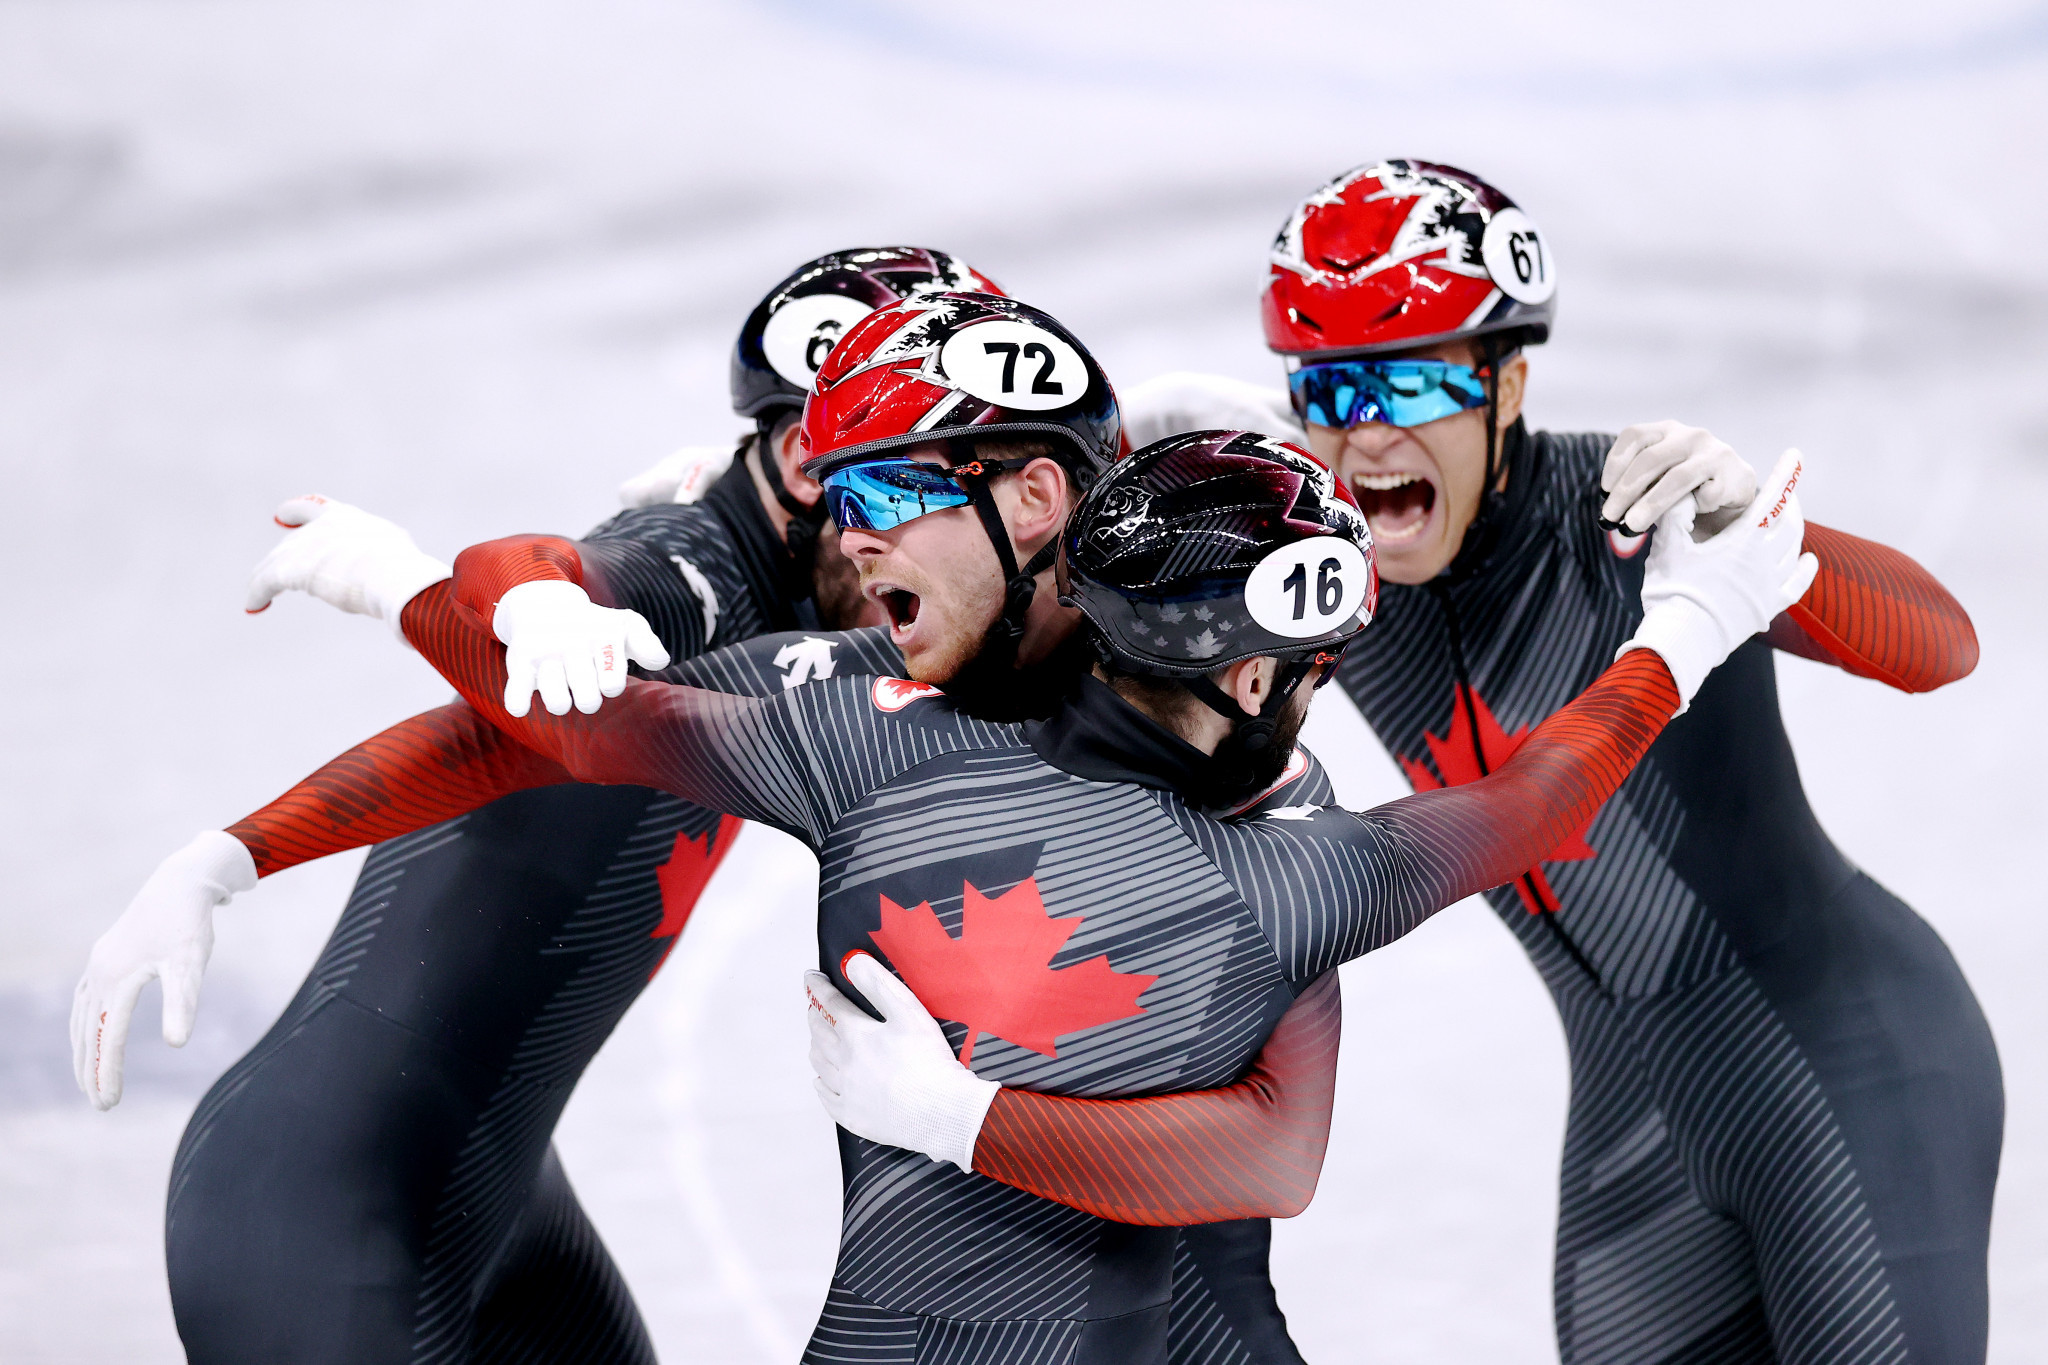 World Short Track Speed Skating Championships in Montreal moved to April